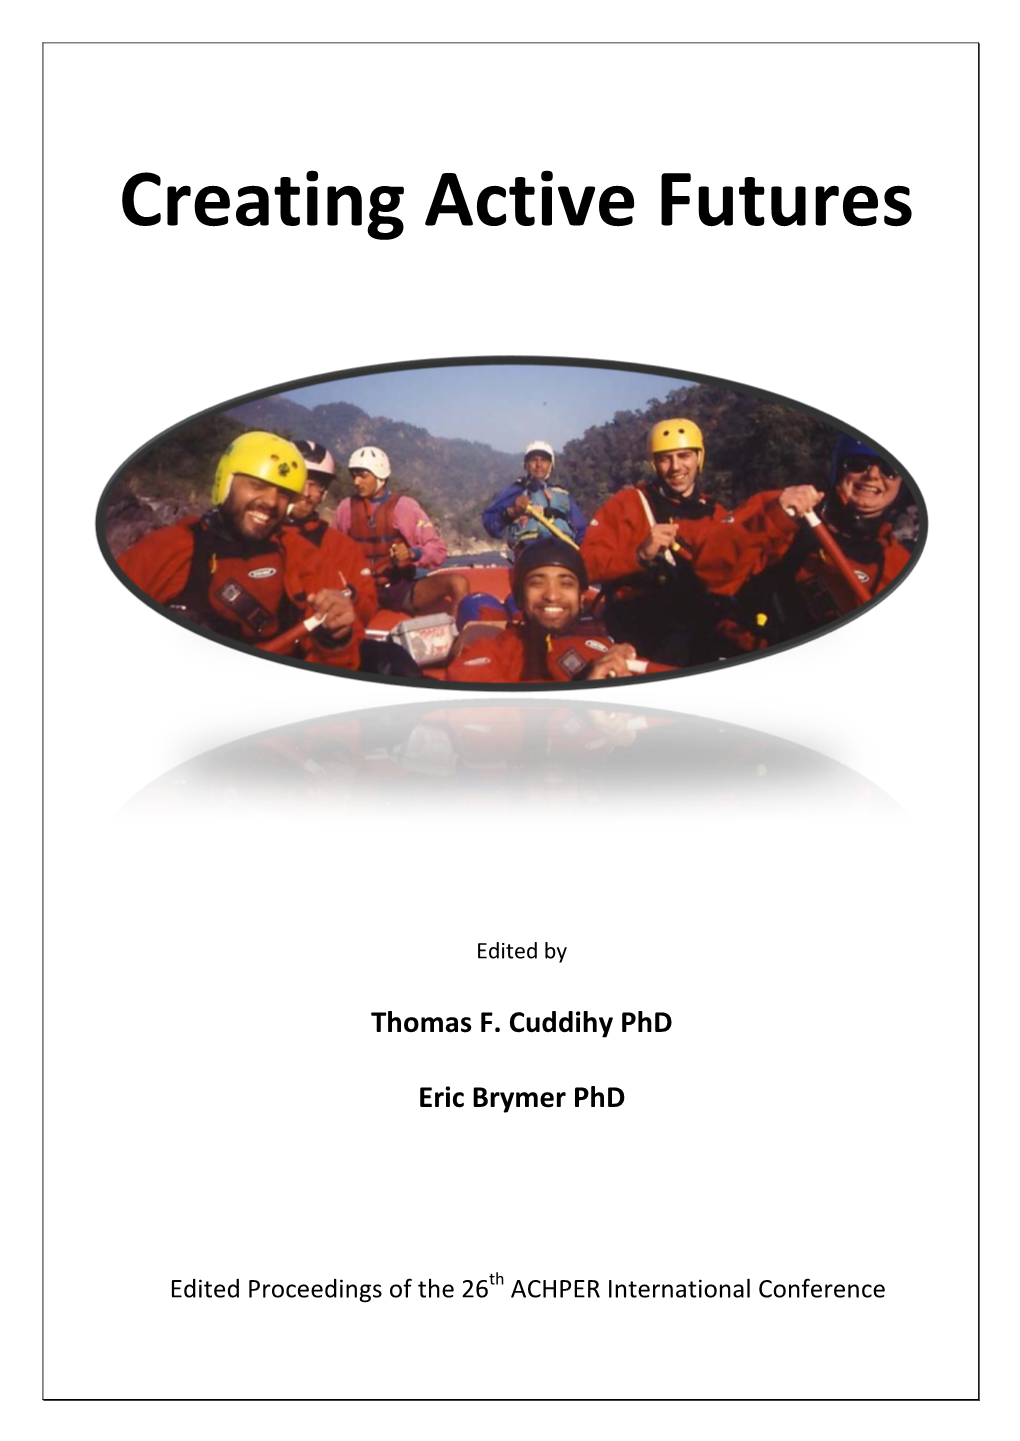 Creating Active Futures